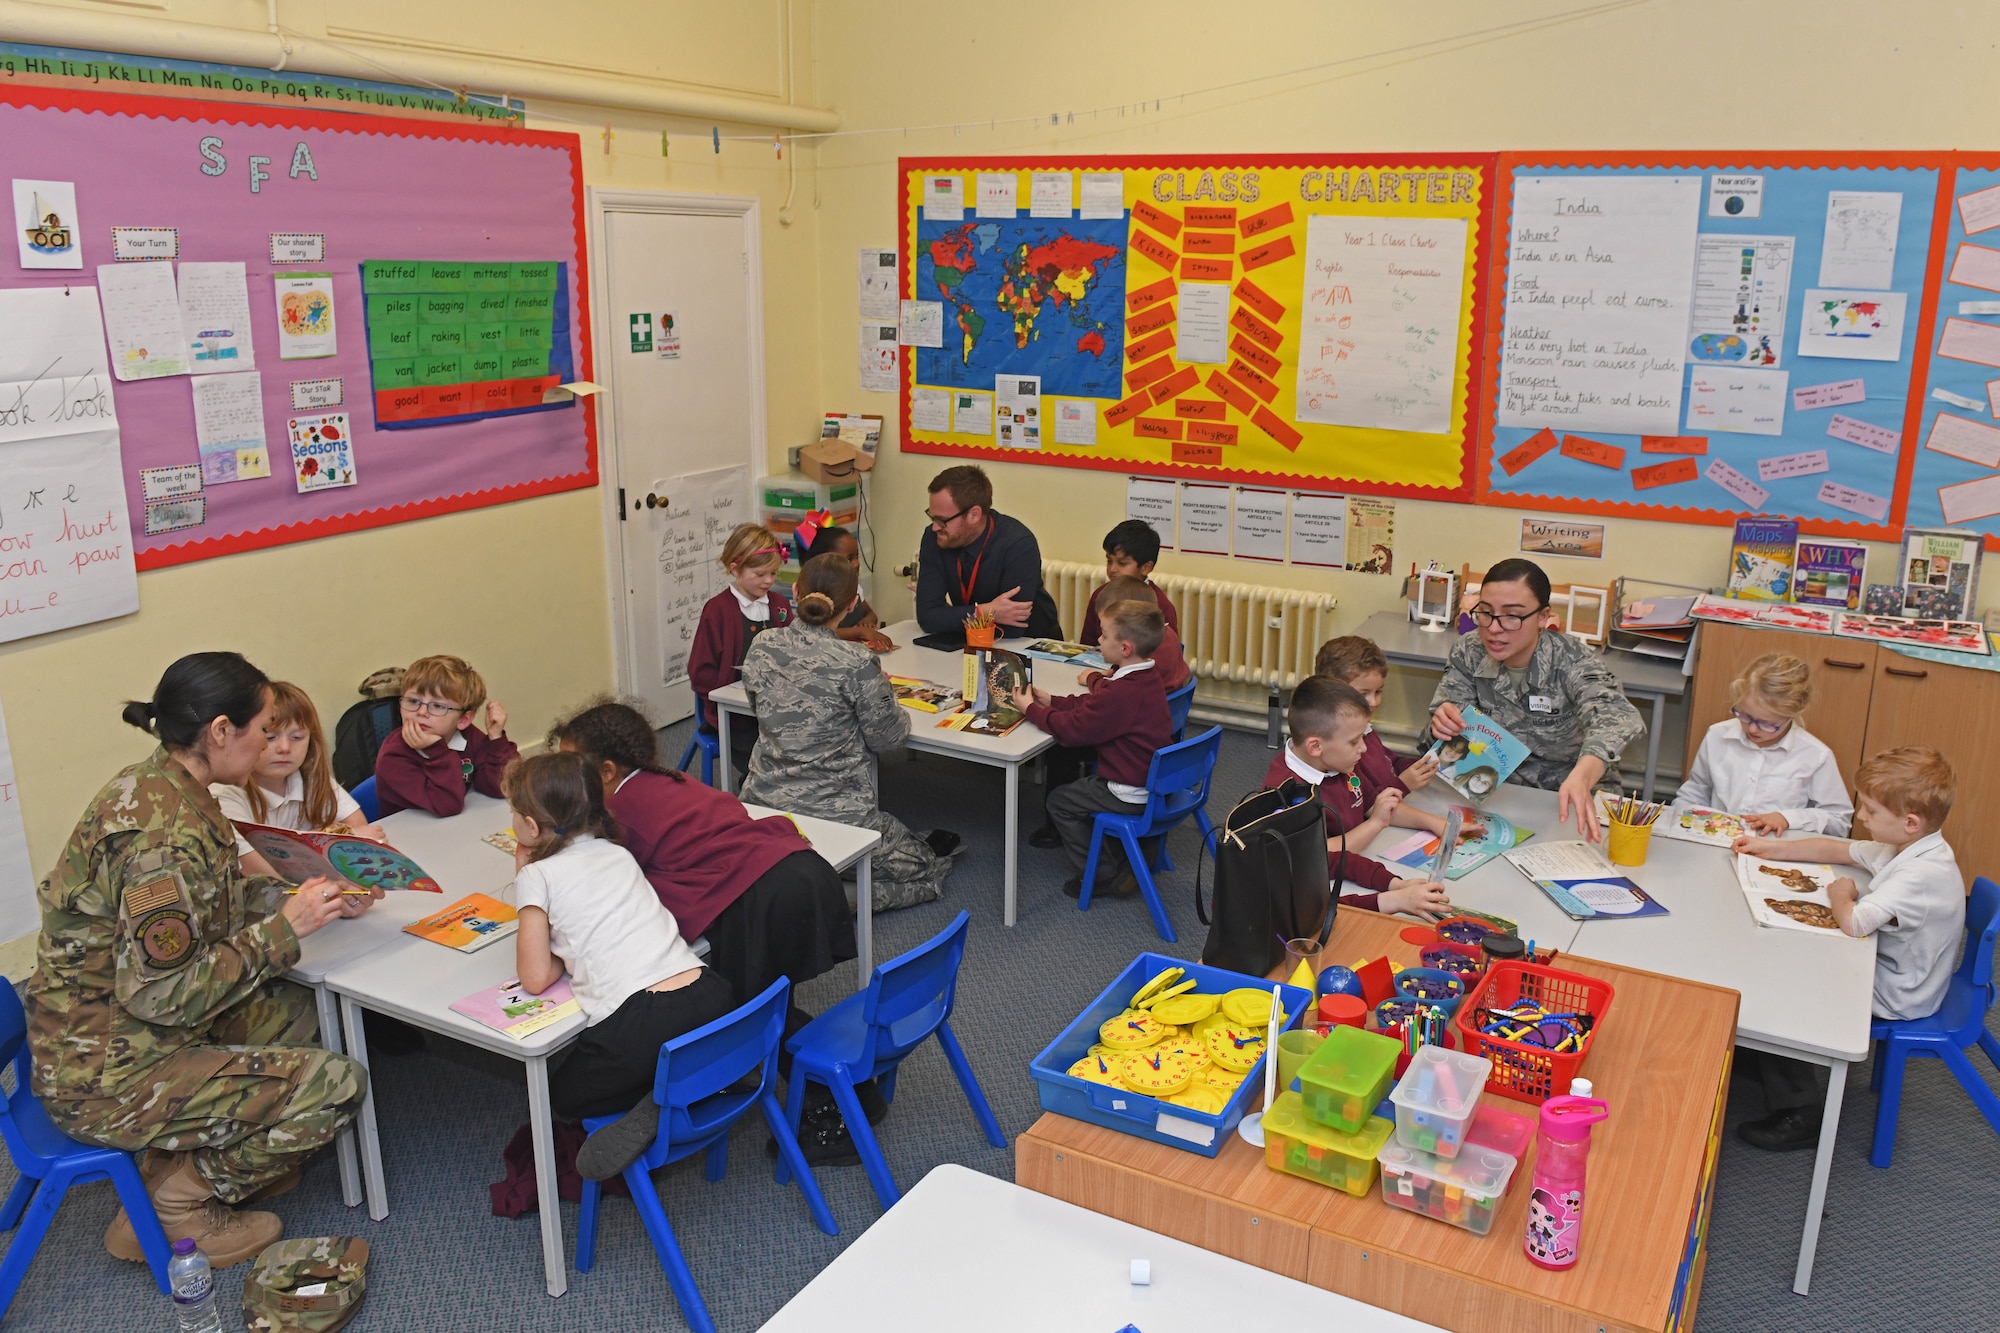 Airmen from the 100th Air Refueling Wing read to children at Houldsworth Valley Primary School in Newmarket, England, Nov. 26, 2019. The purpose of the event was to build relations with the community while also focusing on the importance of reading for the students. (U.S. Air Force photo by Senior Airman Luke Milano)